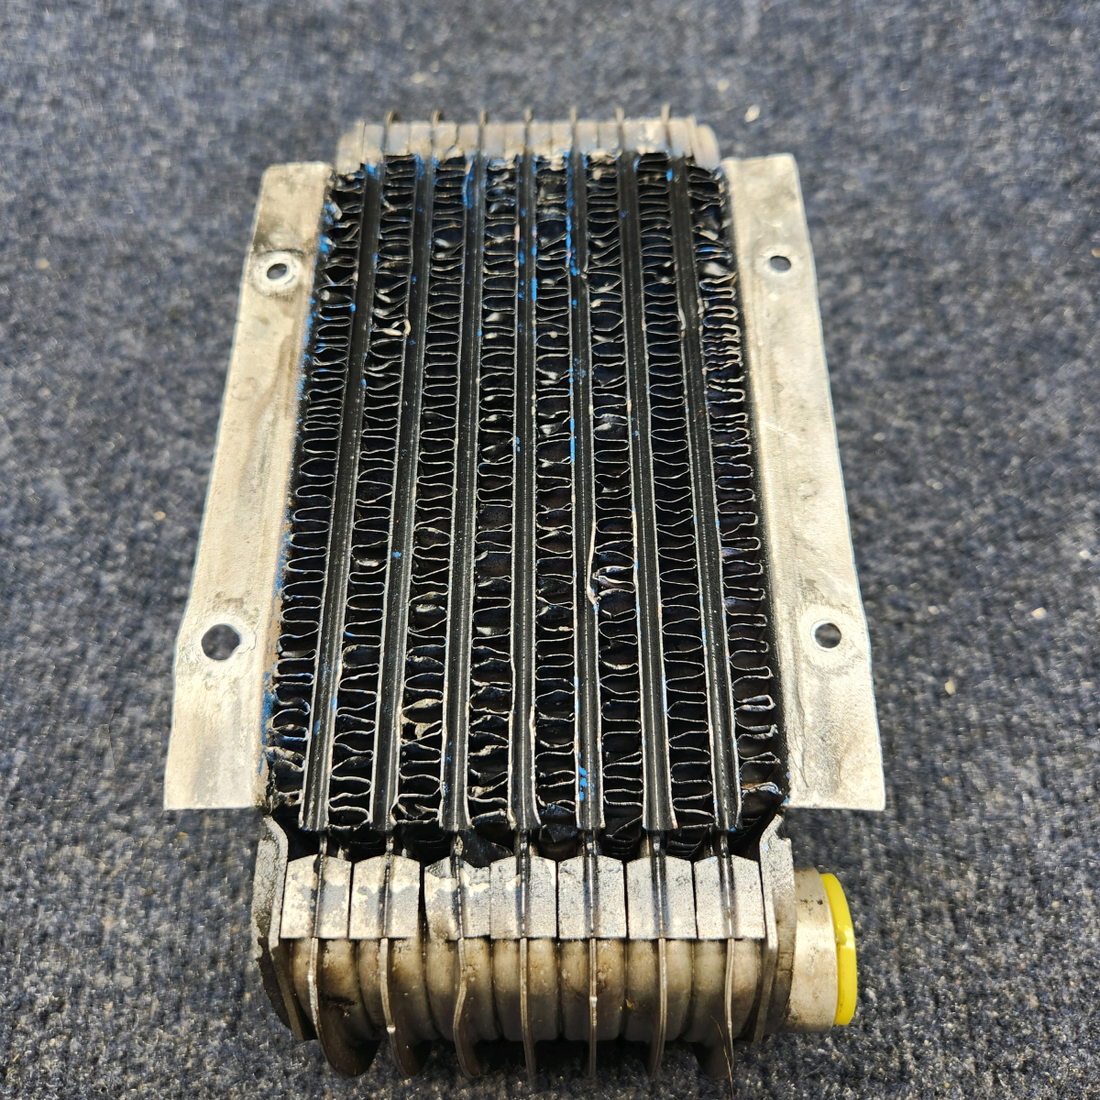 Used aircraft parts for sale, 8526250 Lycoming Textron OIL COOLER ASSEMBLY USED